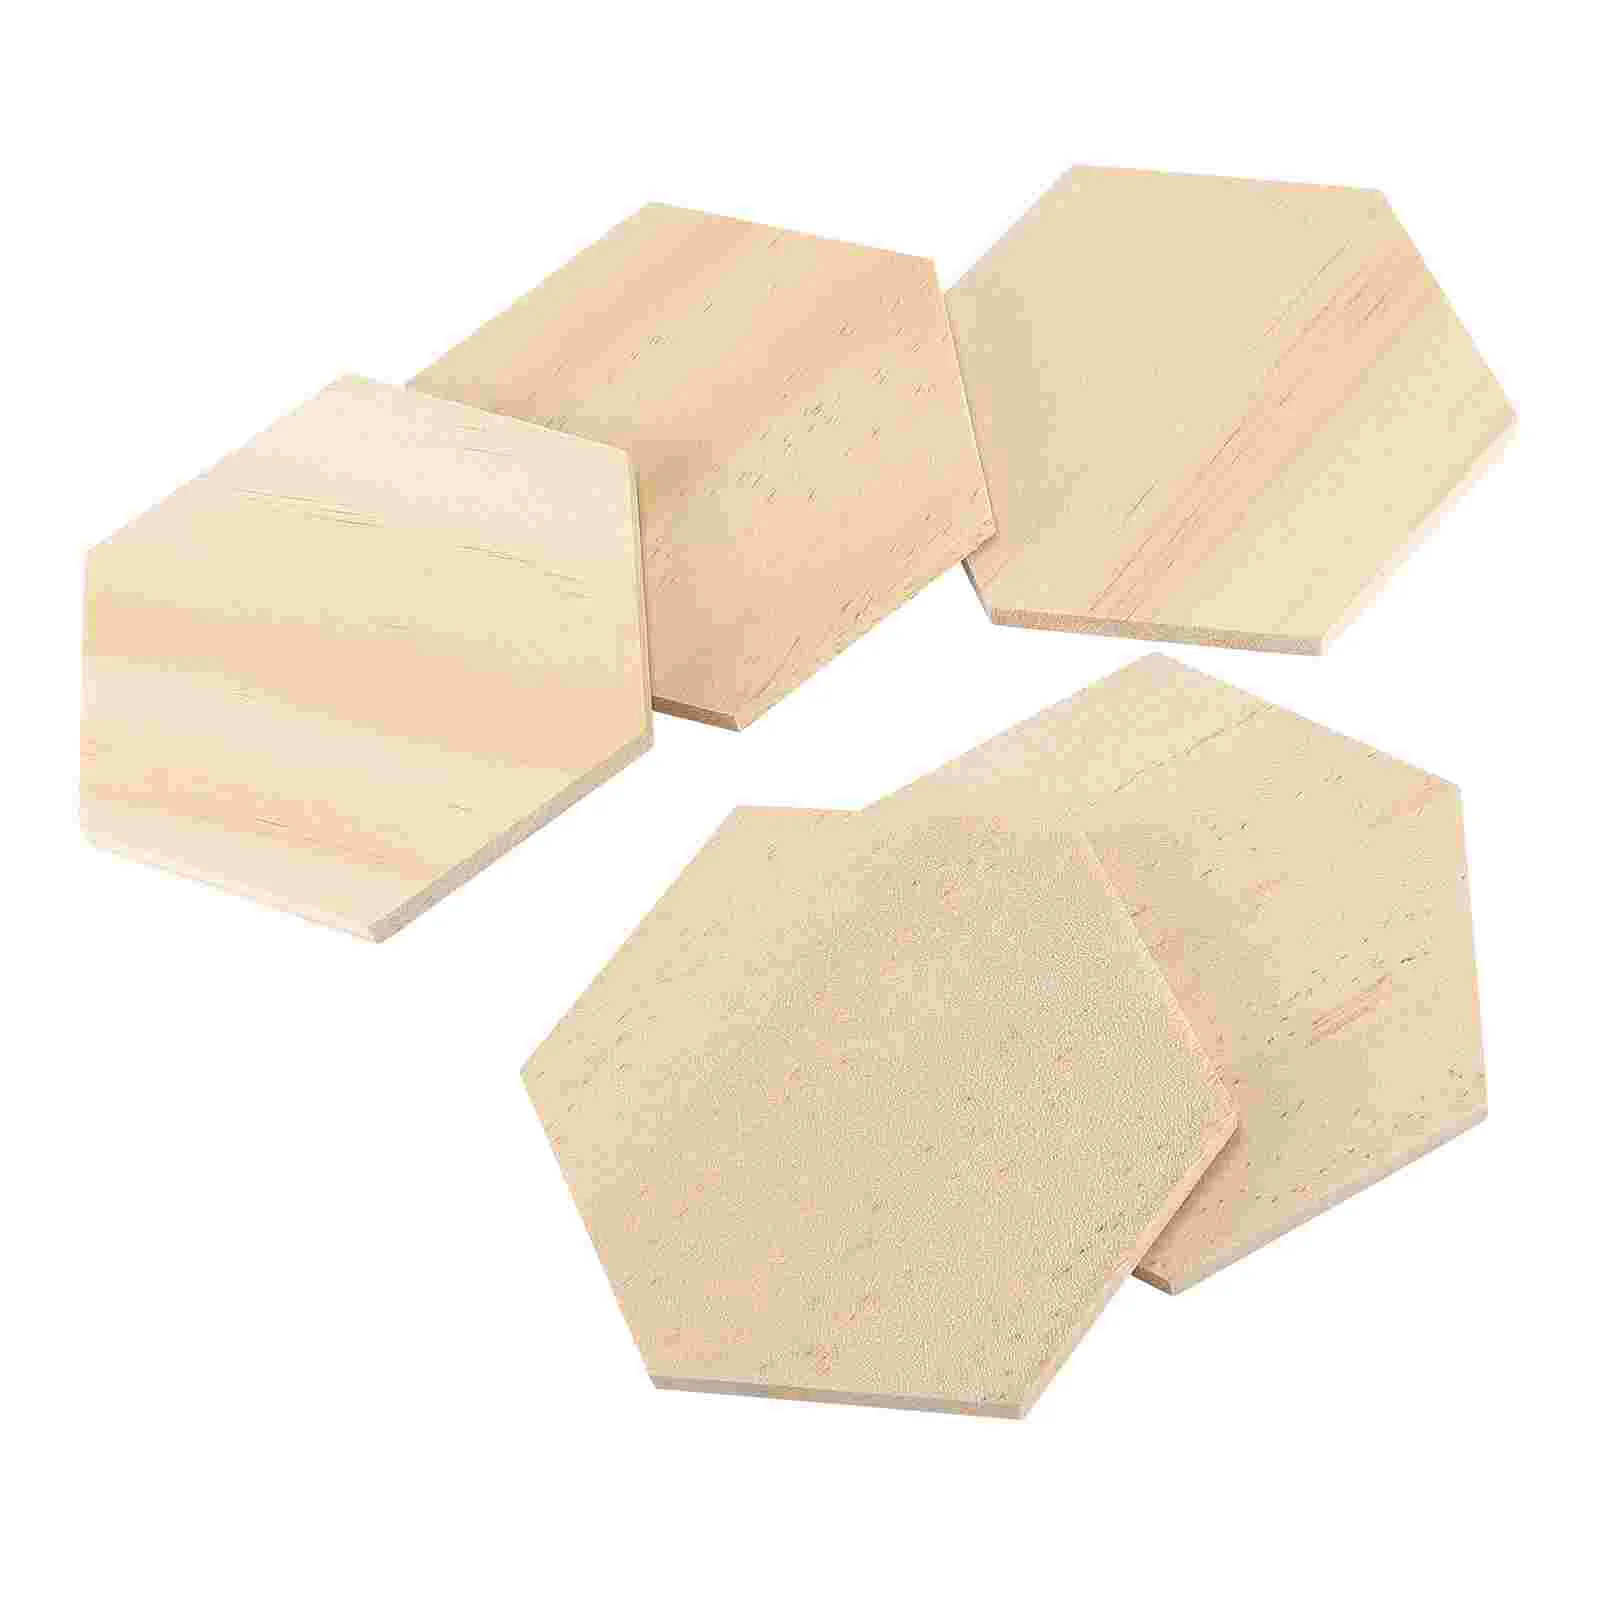 

Hexagon Wood Unfinished Wooden Slices Blank Blanks Pieces Diy Ornaments Shape Cutout Slice